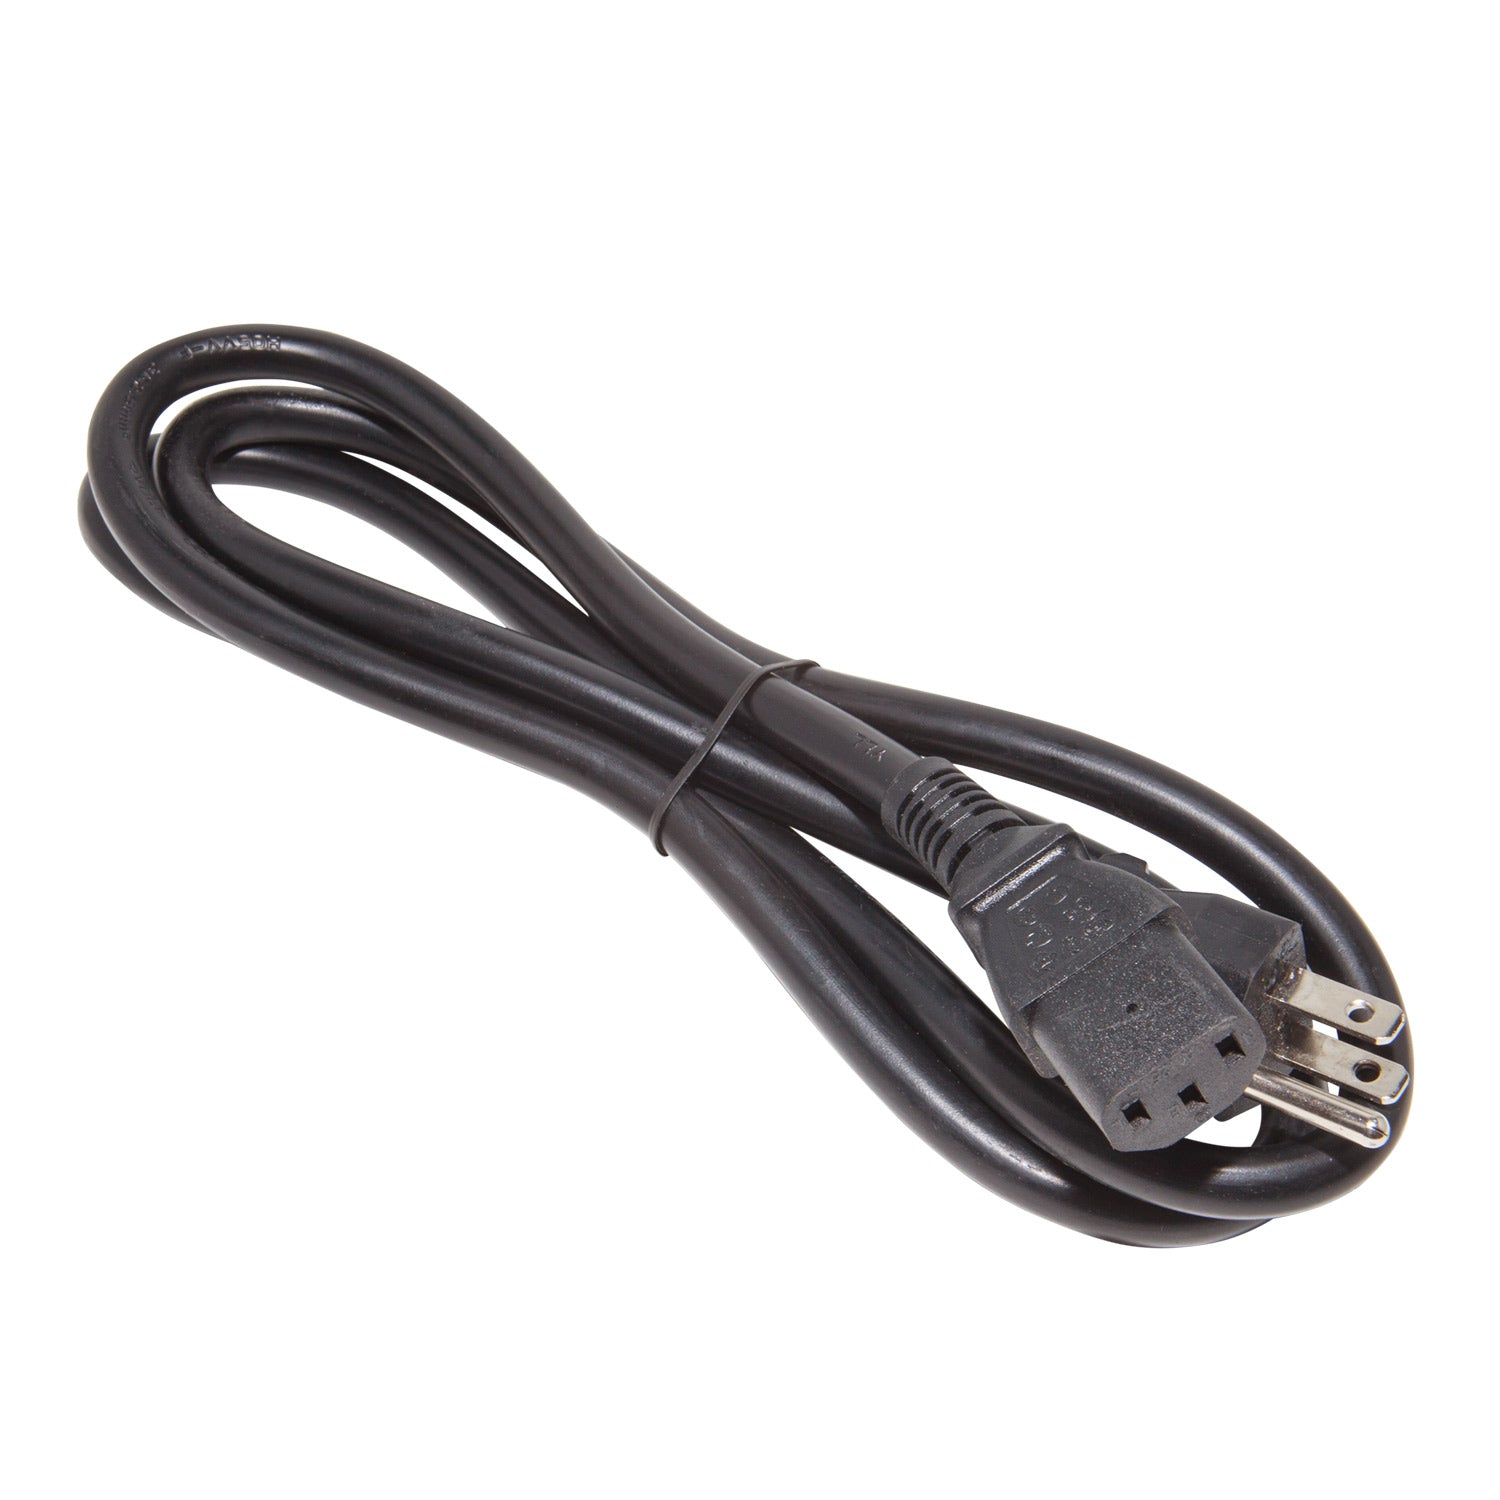 P_CUS Replacement Power Cord | Electrical Cord for Kitchen Equipment | US Plug